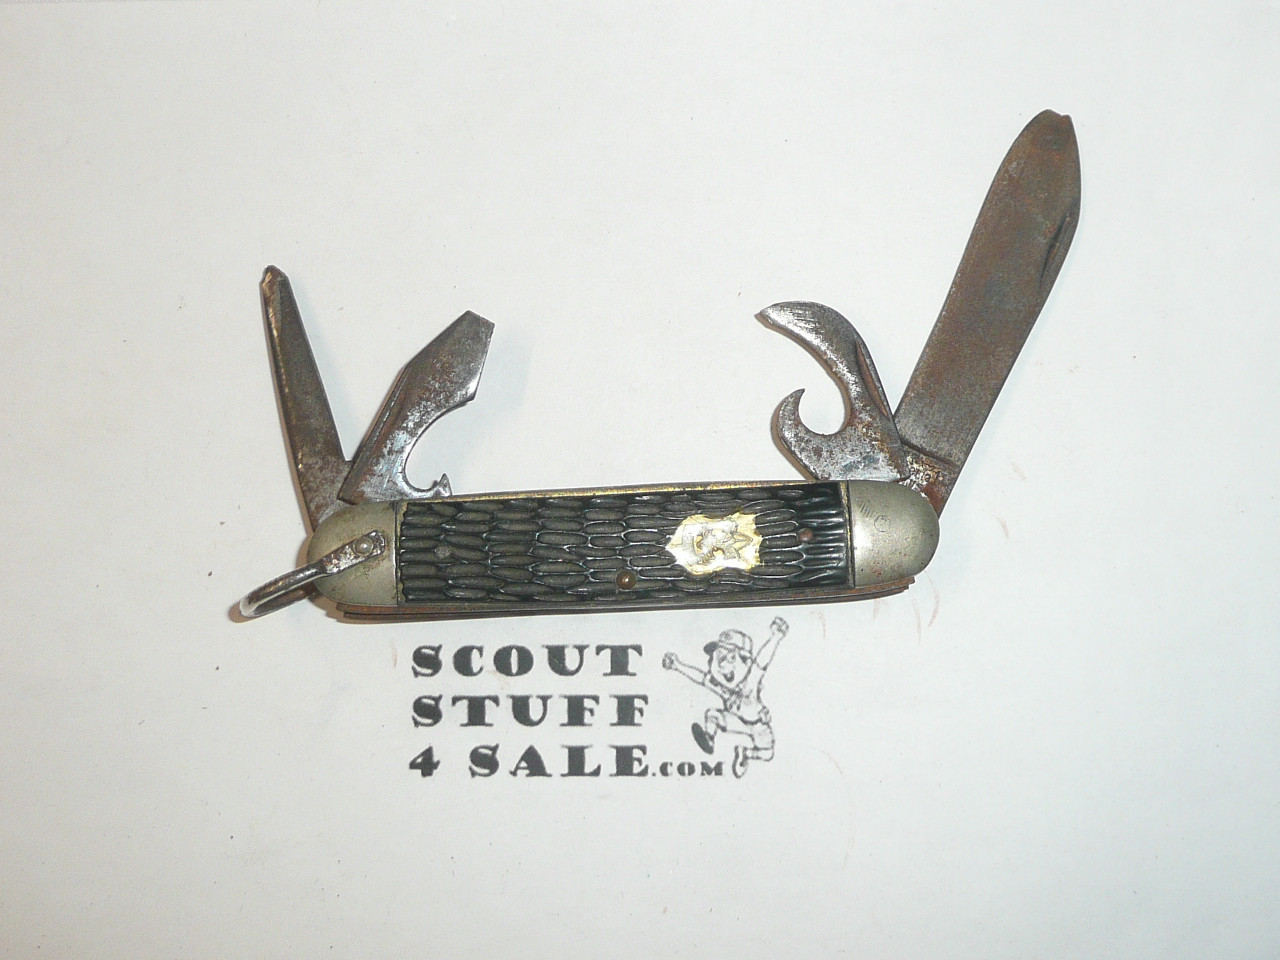 Boy Scout Knife, Imperial Manufacturer, Used with some rust (PAT11)